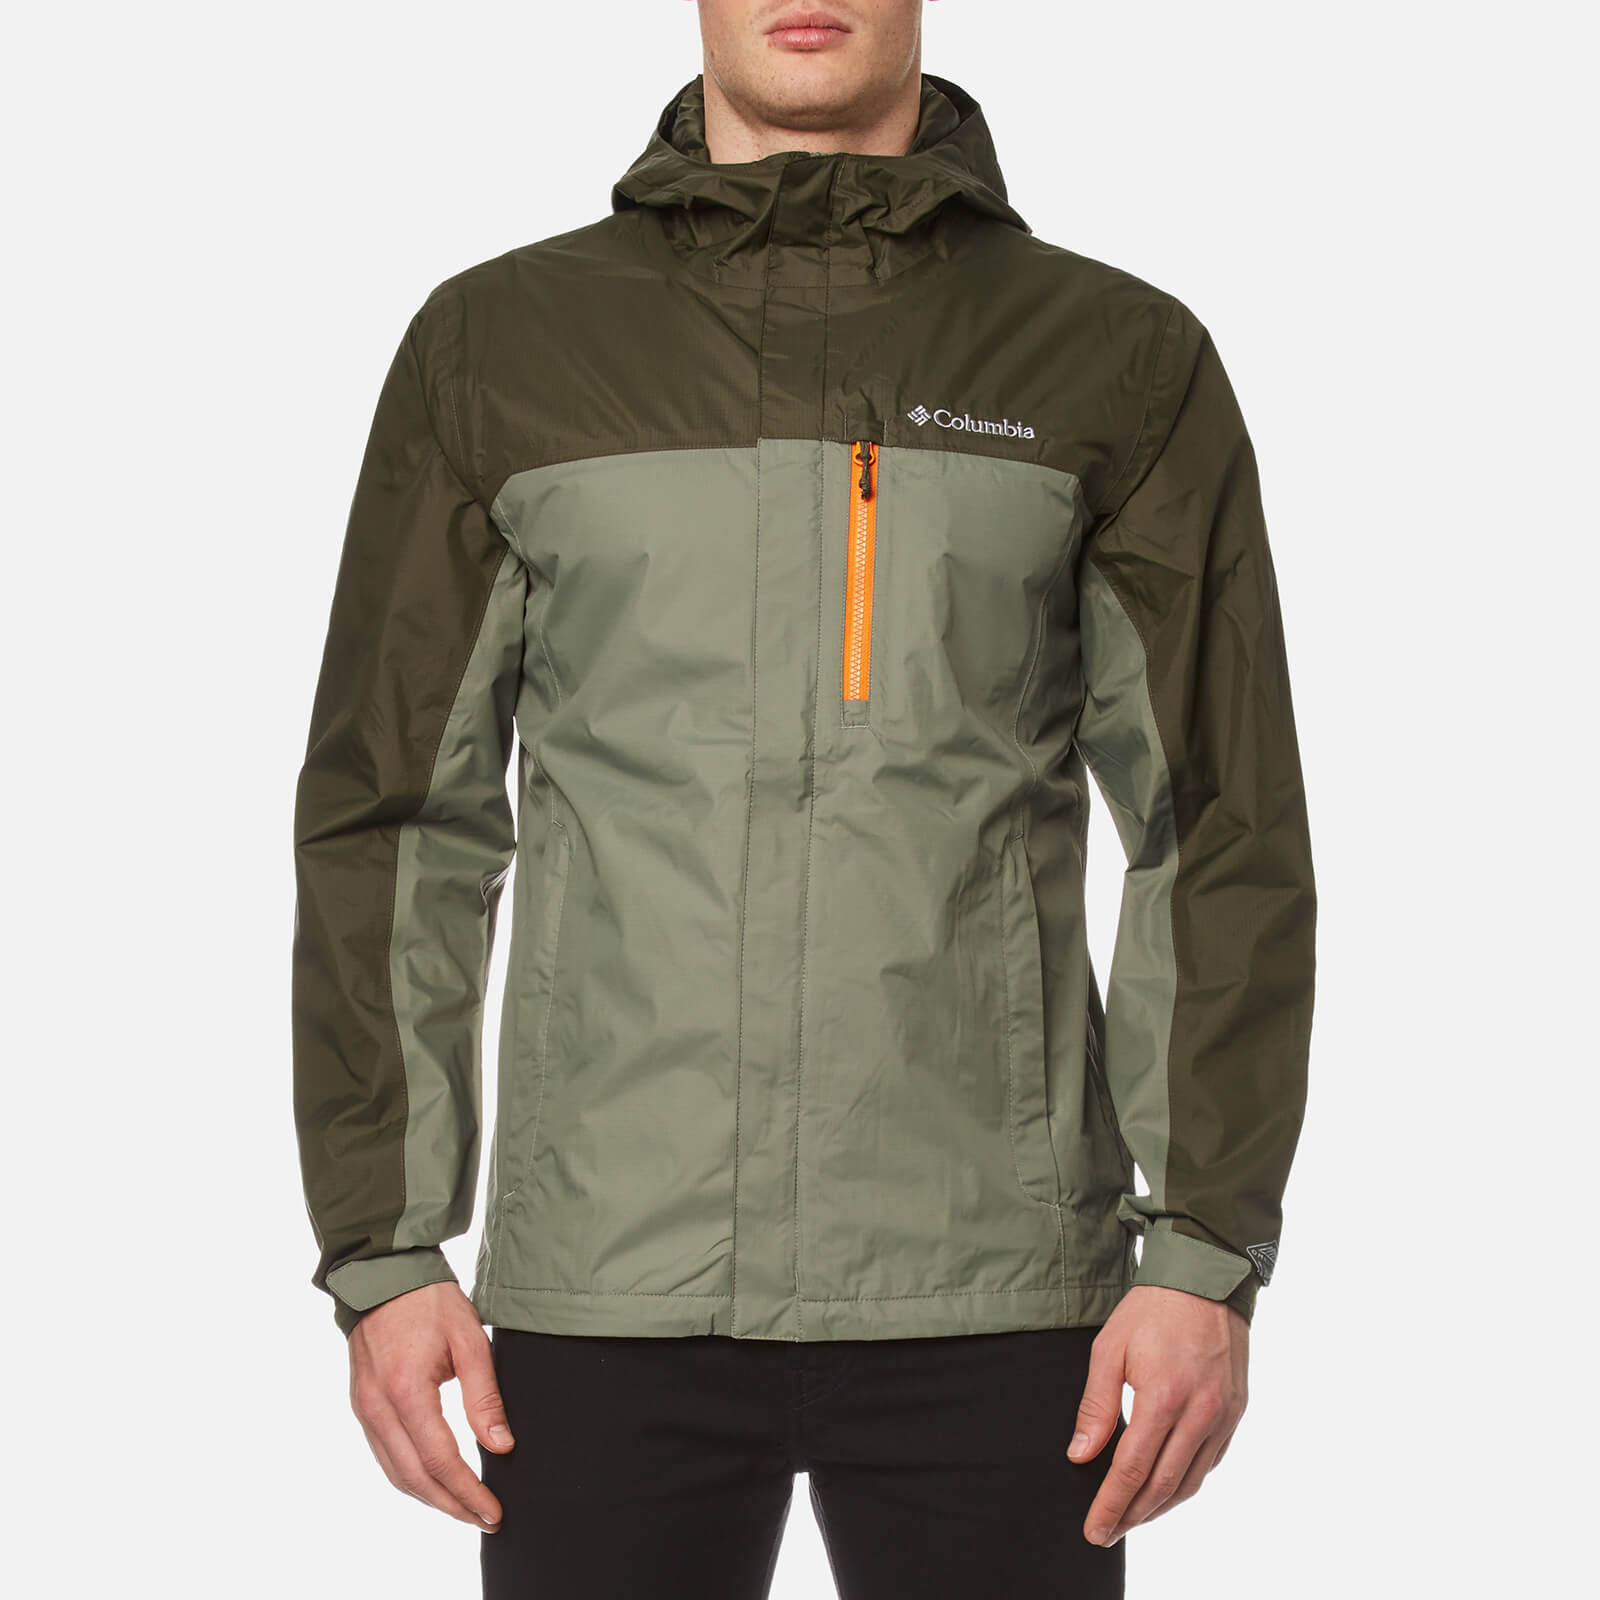 pouring adventure jacket